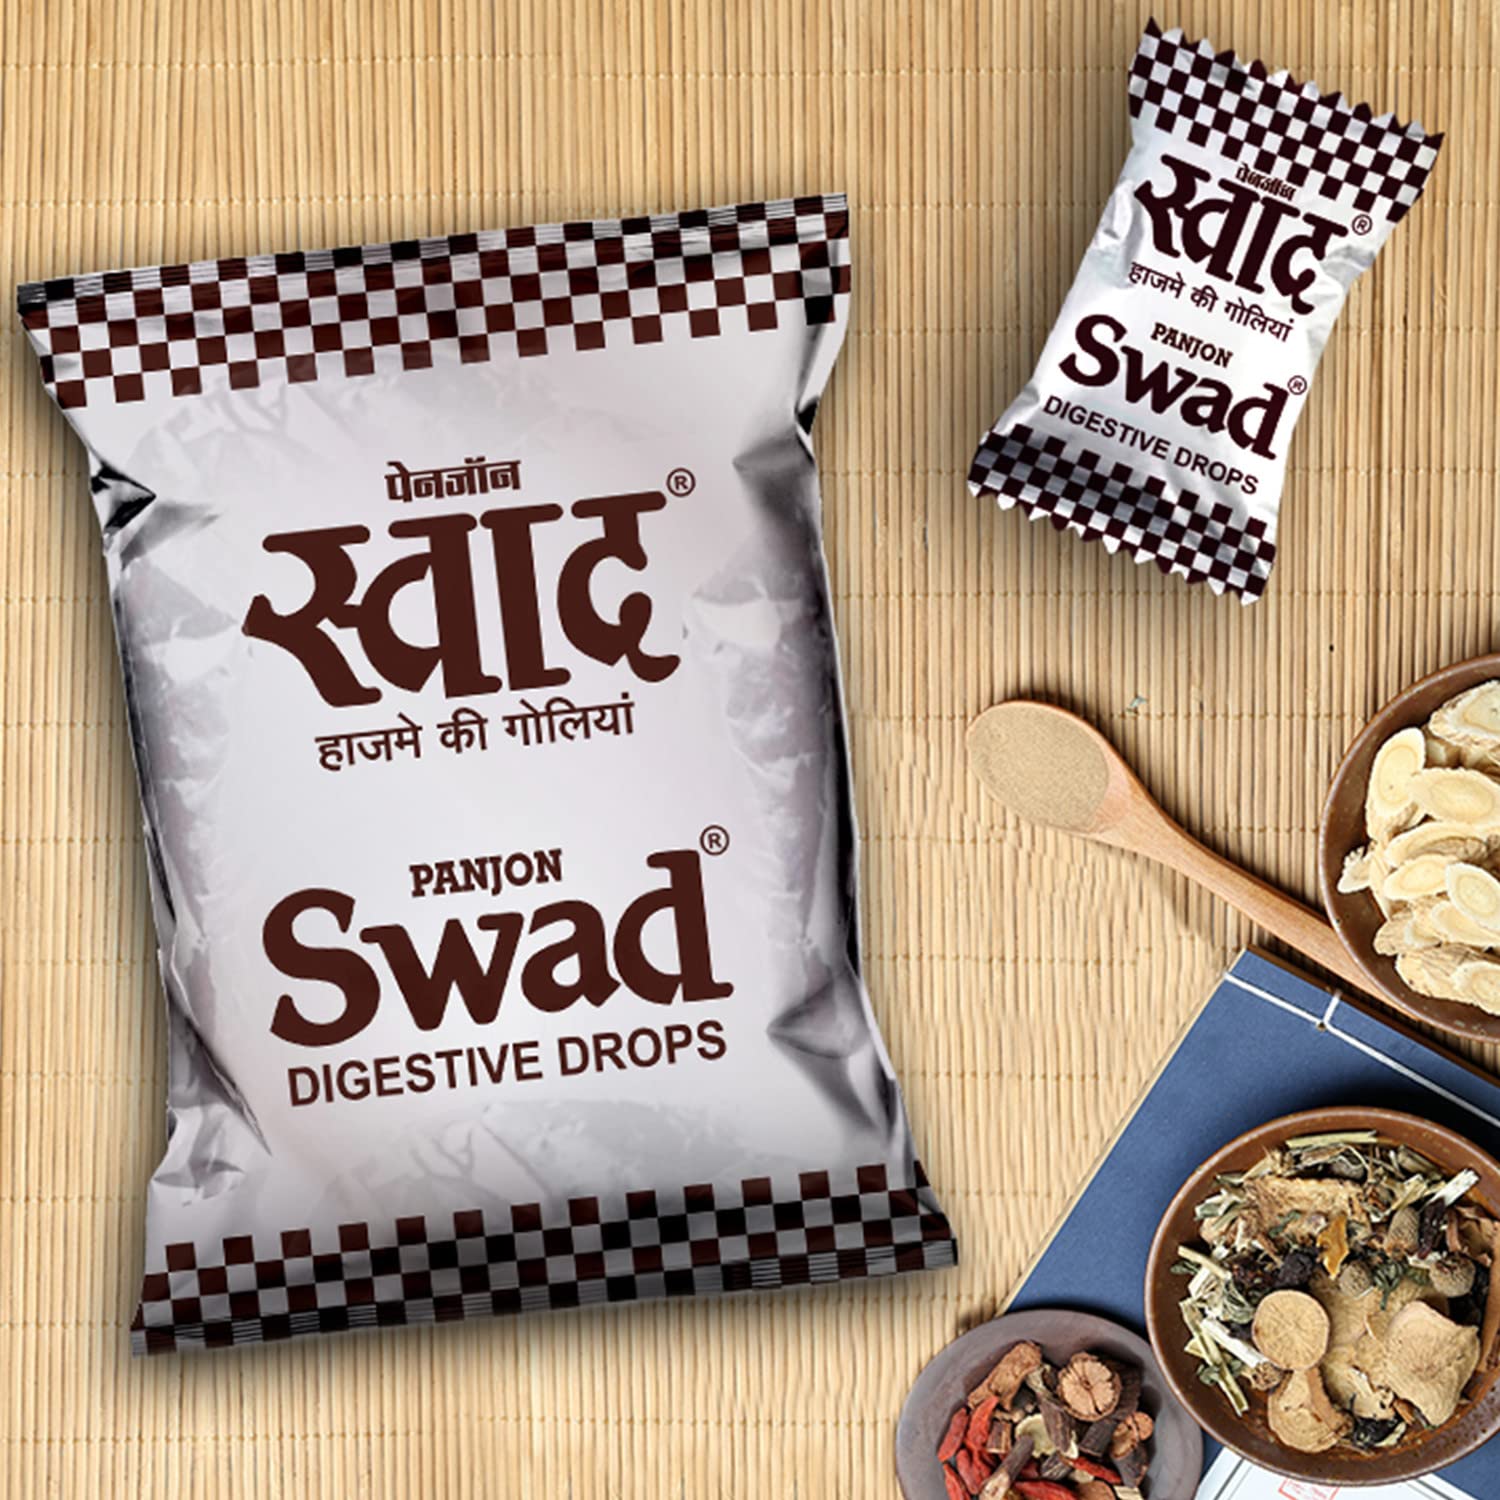 Swad Happy Anniversary Gift Hamper Set (Mixed Toffee & Rosted Saunf & Regular 25 Candies Packet Pachak Mukhwas Mouthfreshener, 25 Candy & 2 bottle) with Greeting Card & Jute Bag,Gift Item